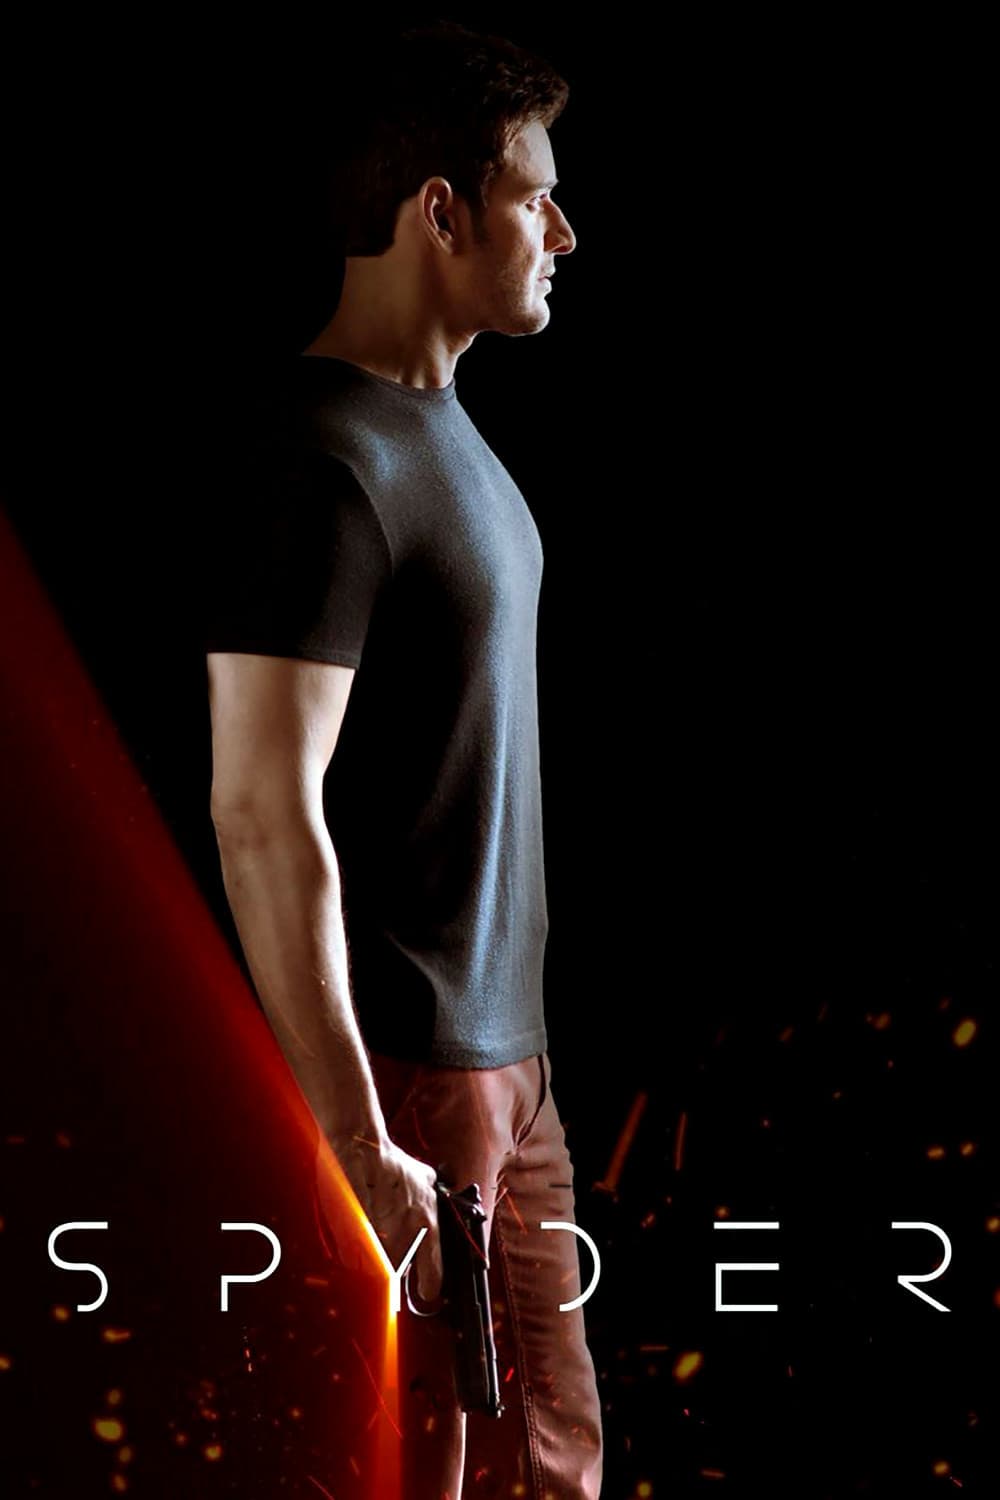 Poster for the movie "Spyder"